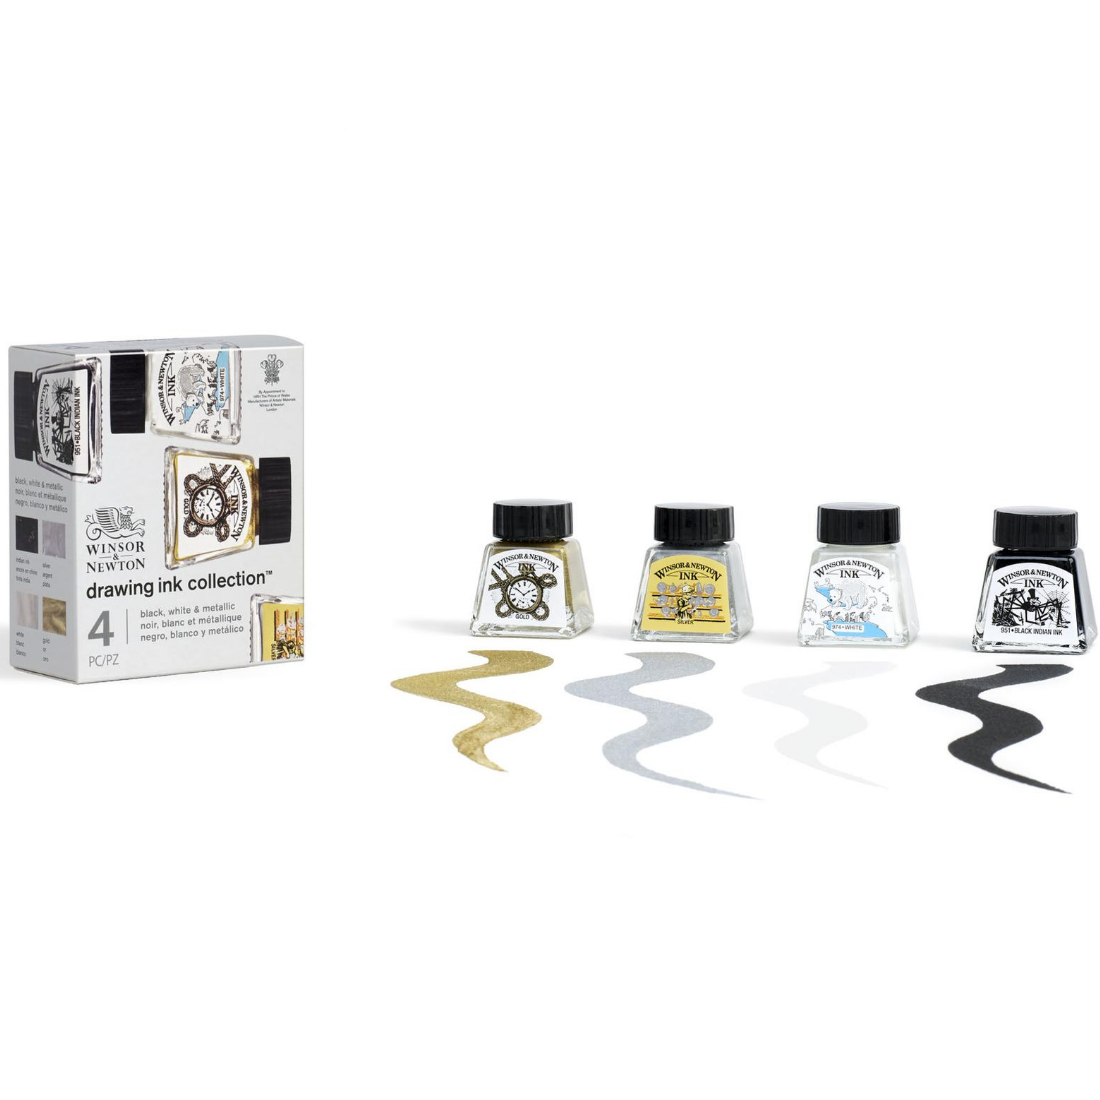 Set Tinta Drawing Ink Collection 4 Cores winsor & newton